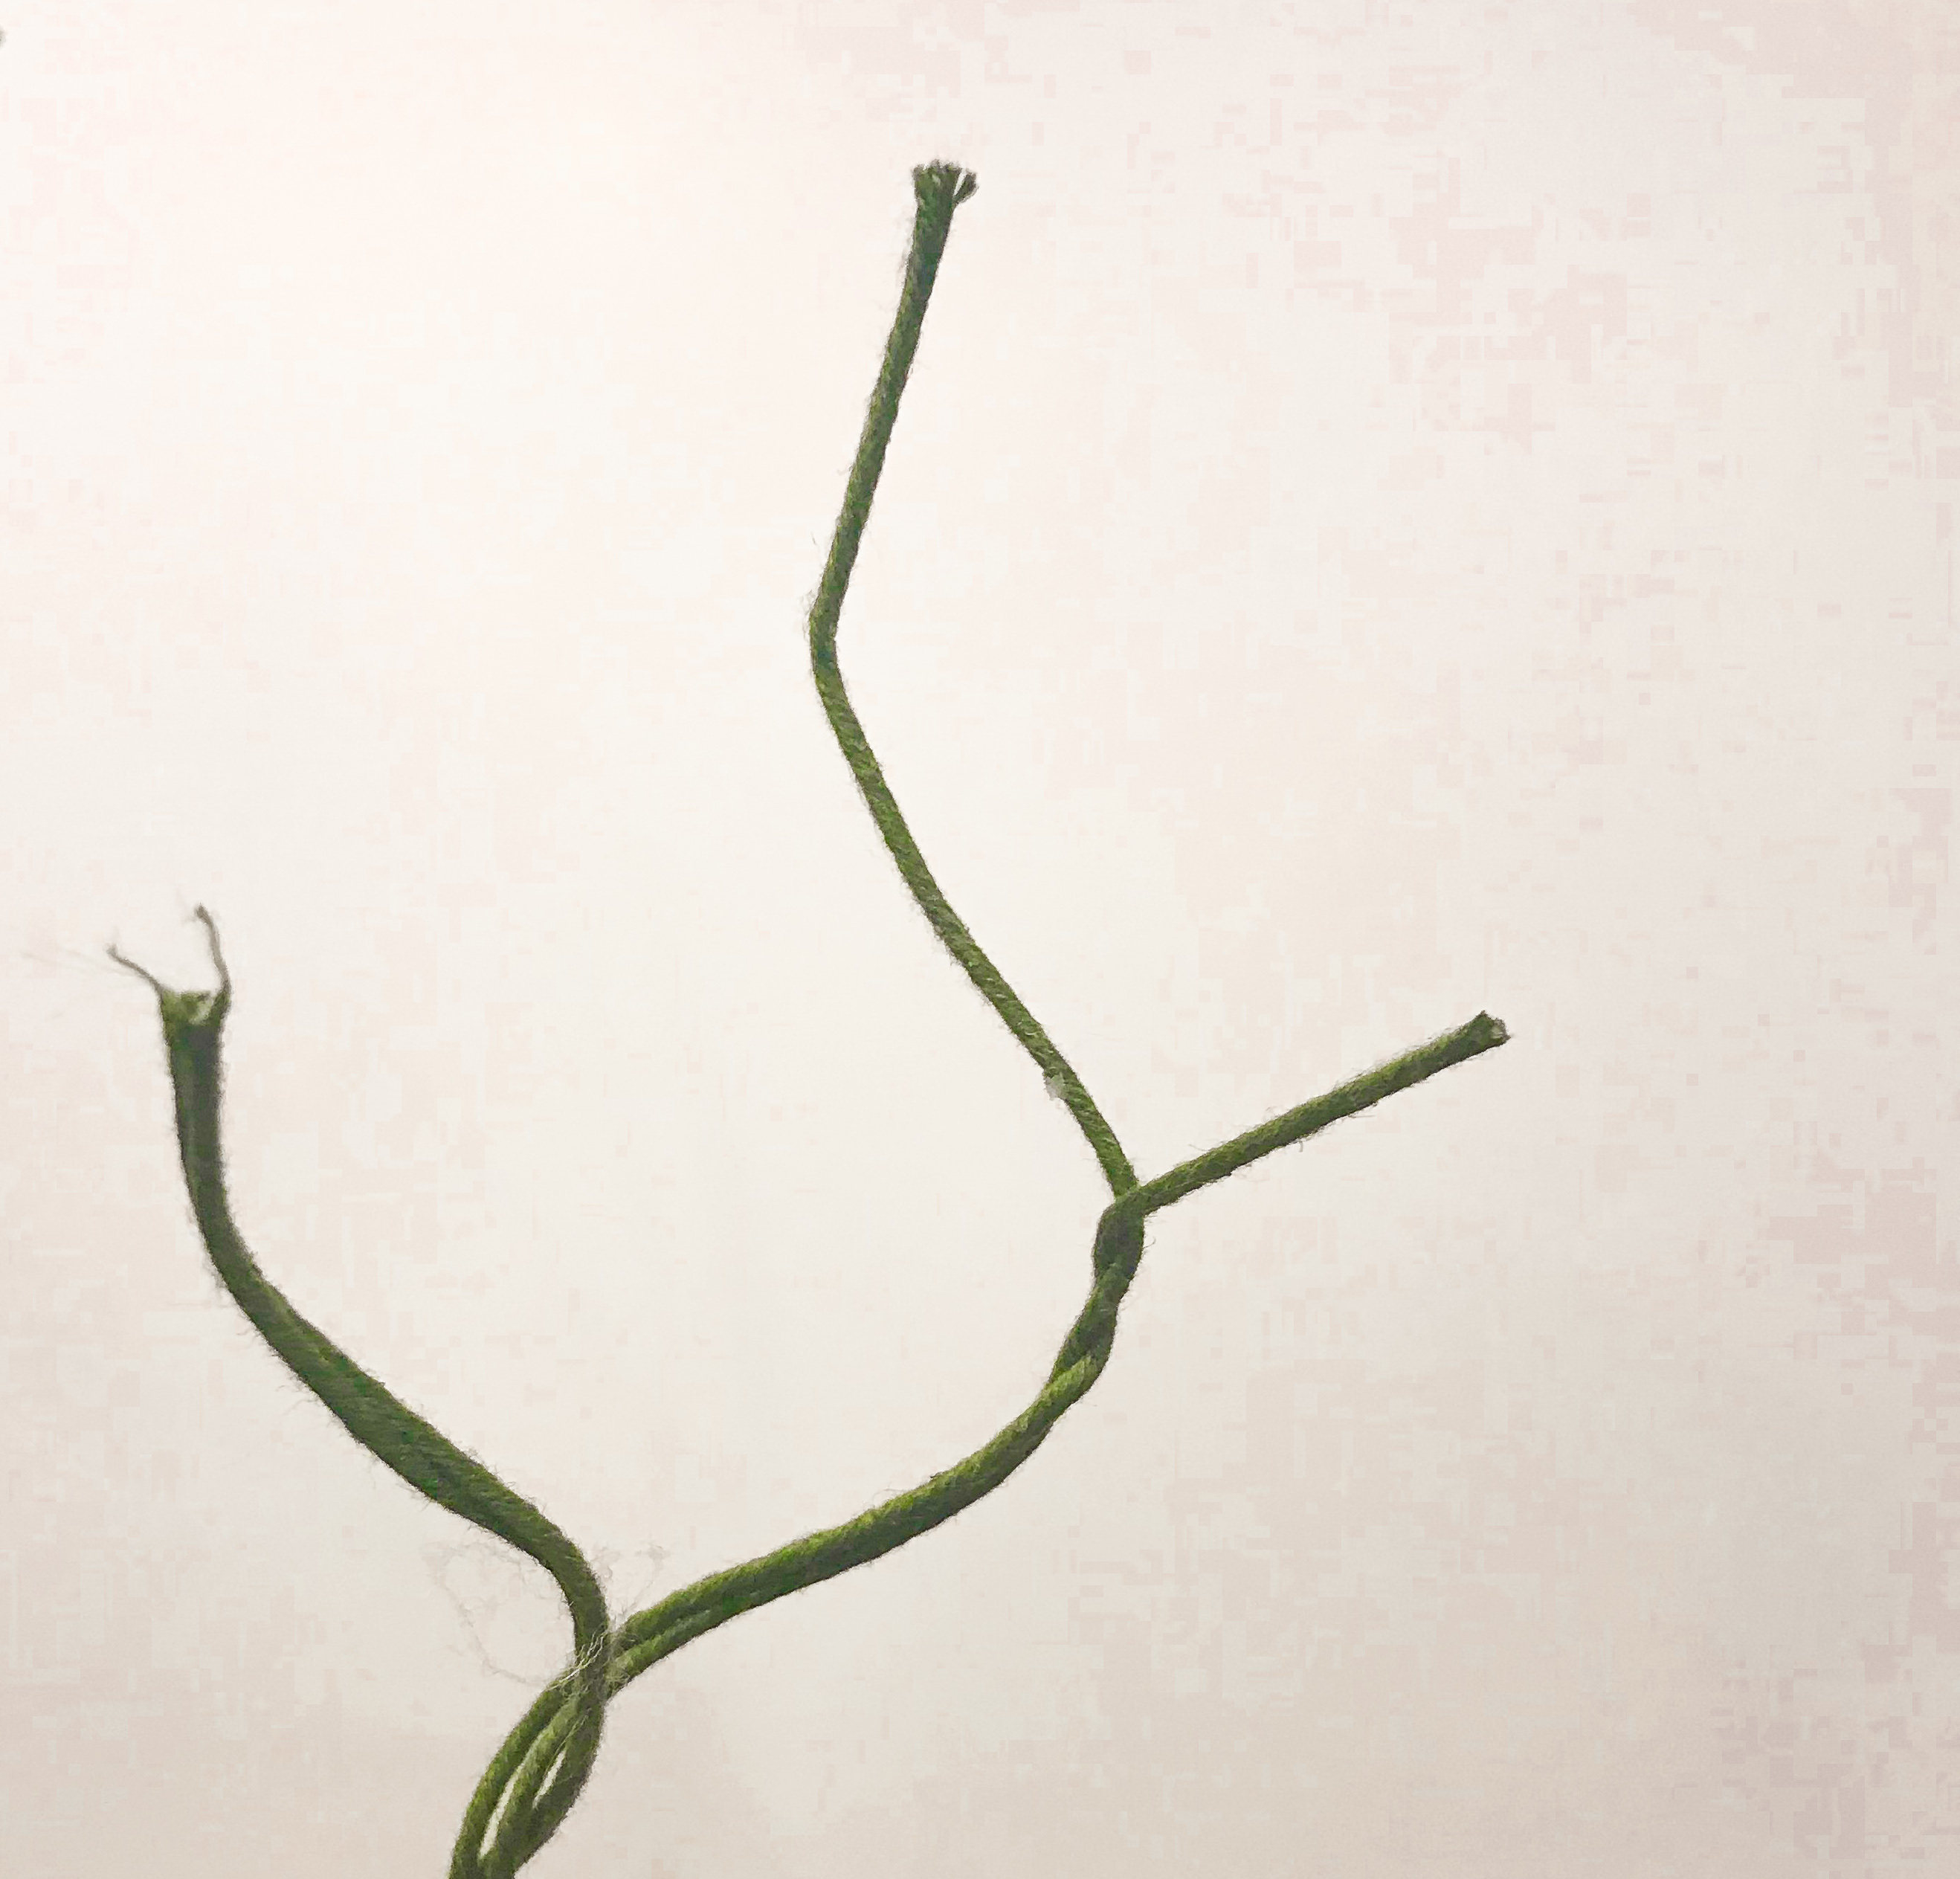 Uneven green floral stems bent to emulate tree branches. 